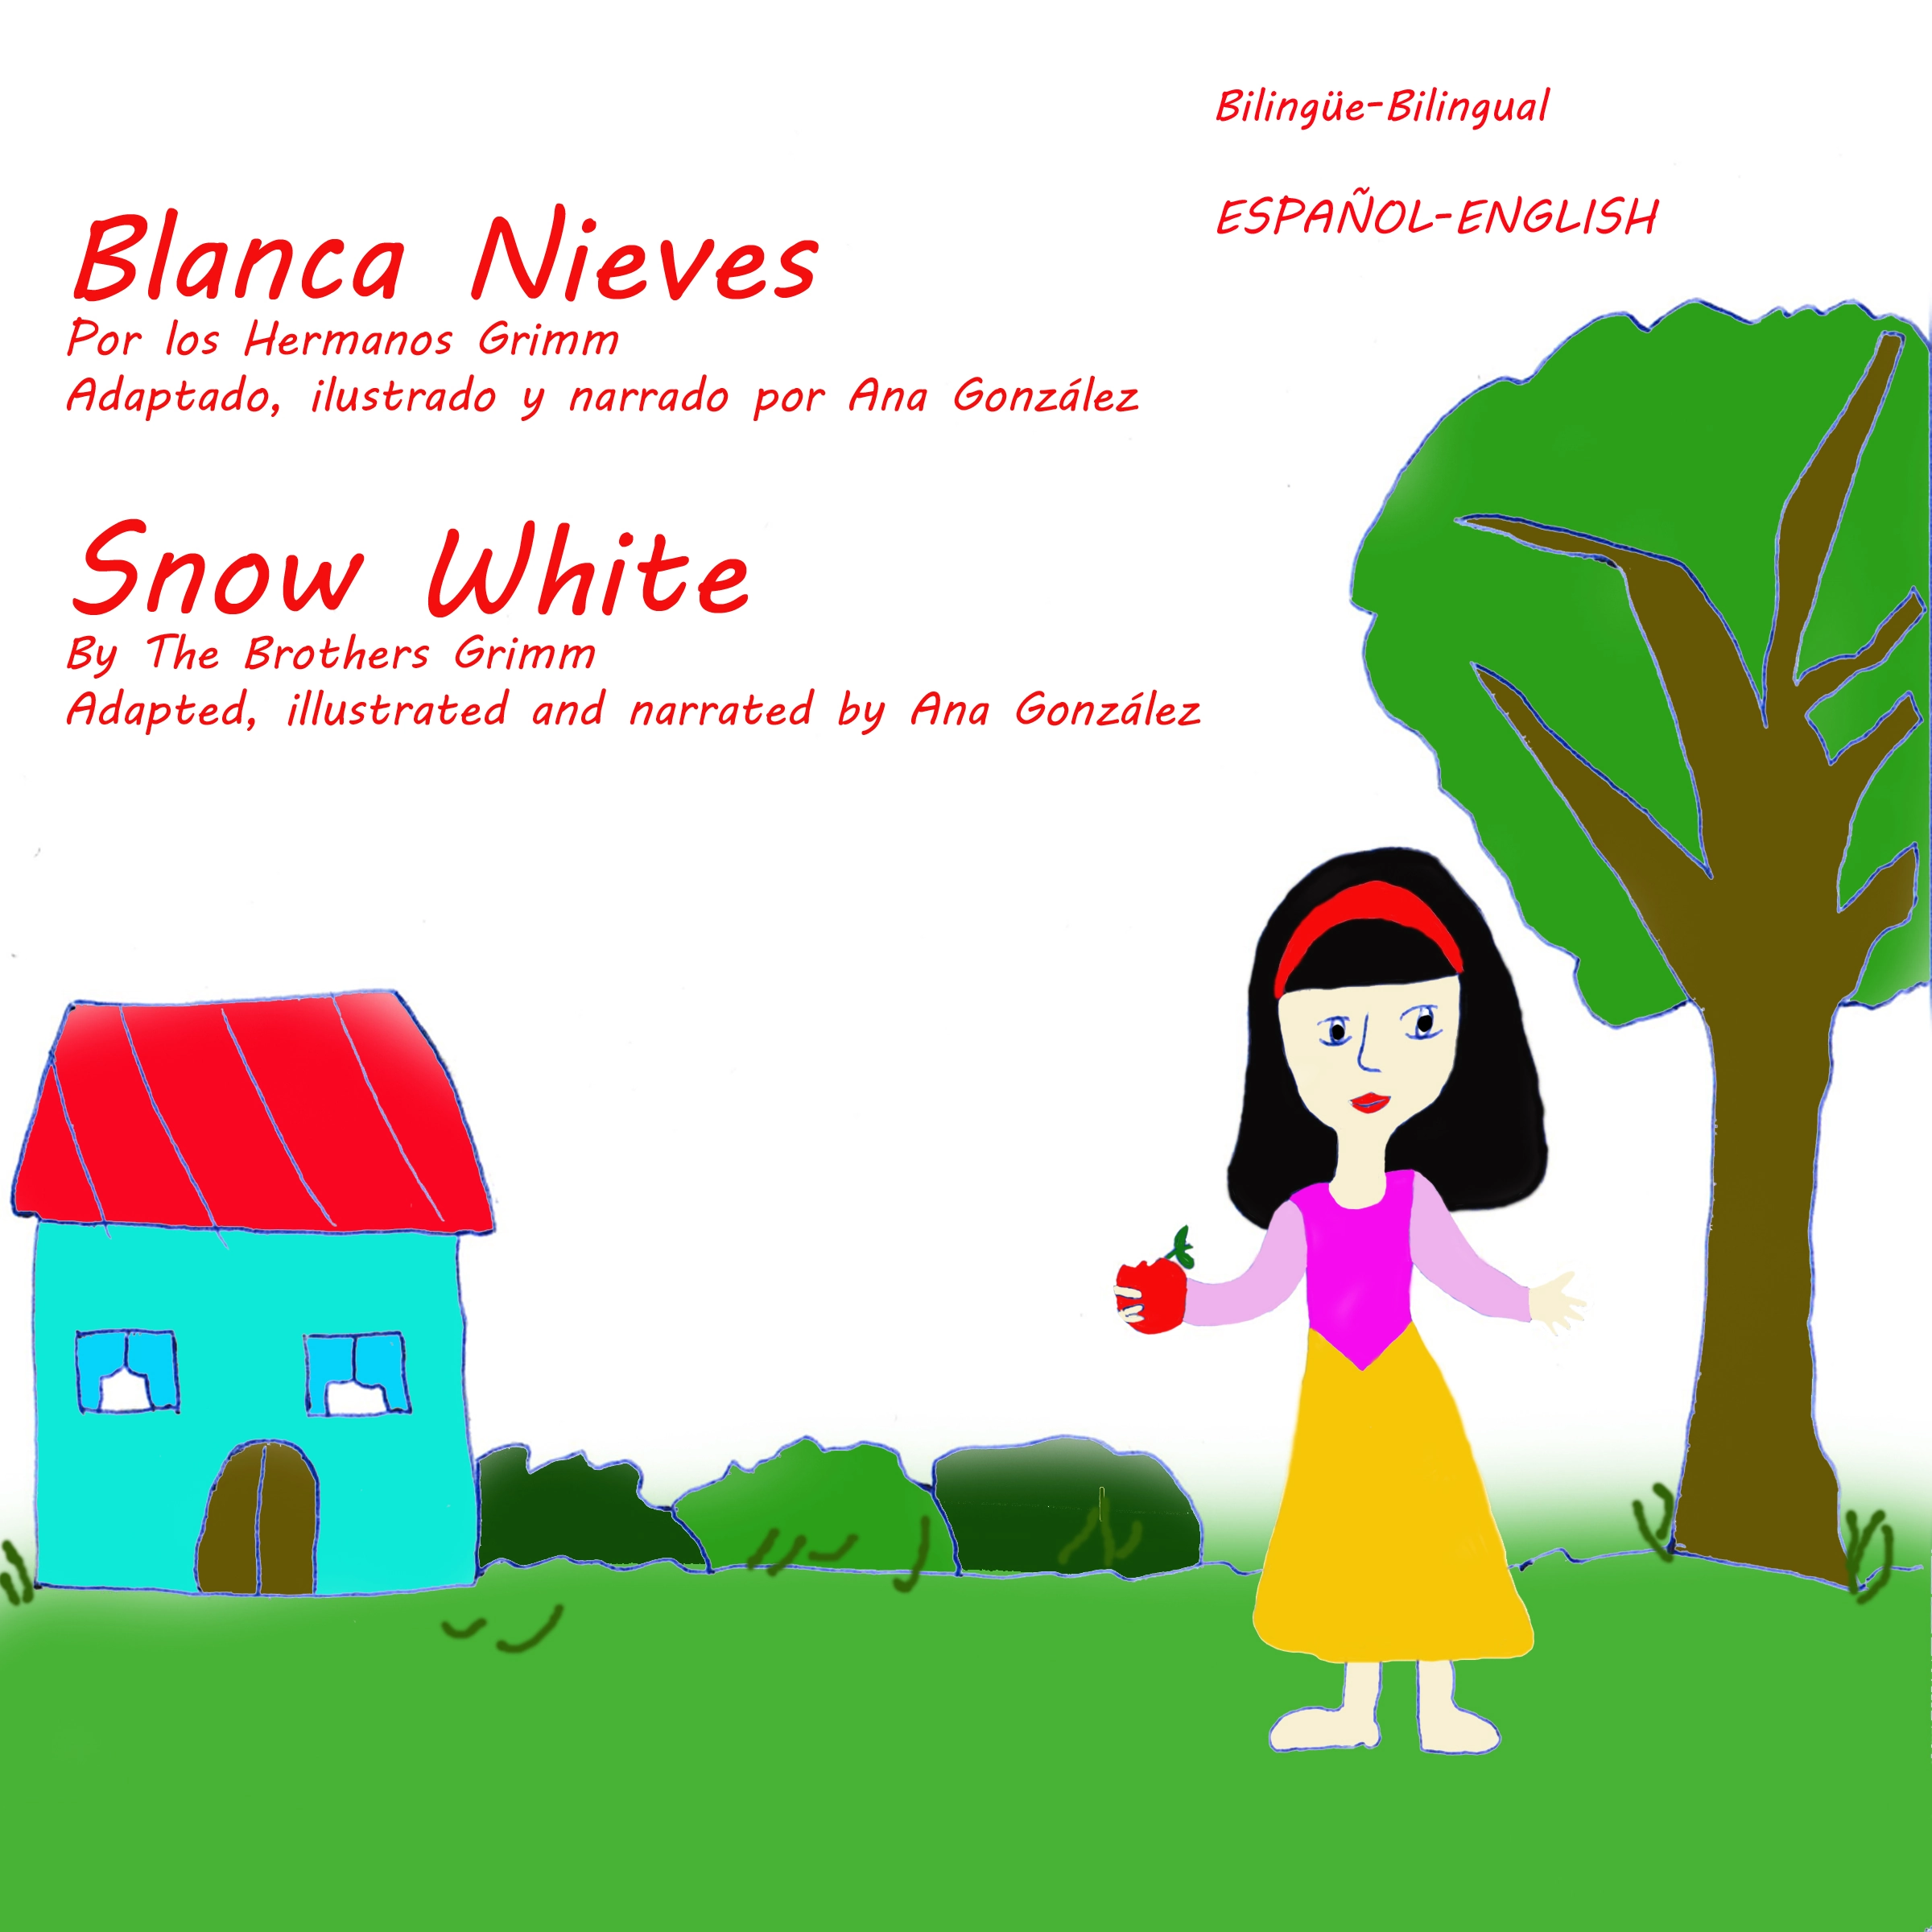 Snow White and the Seven Dwarfs - Blanca Nieves y los Siete Enanitos Audiobook by Ana Gonzalez